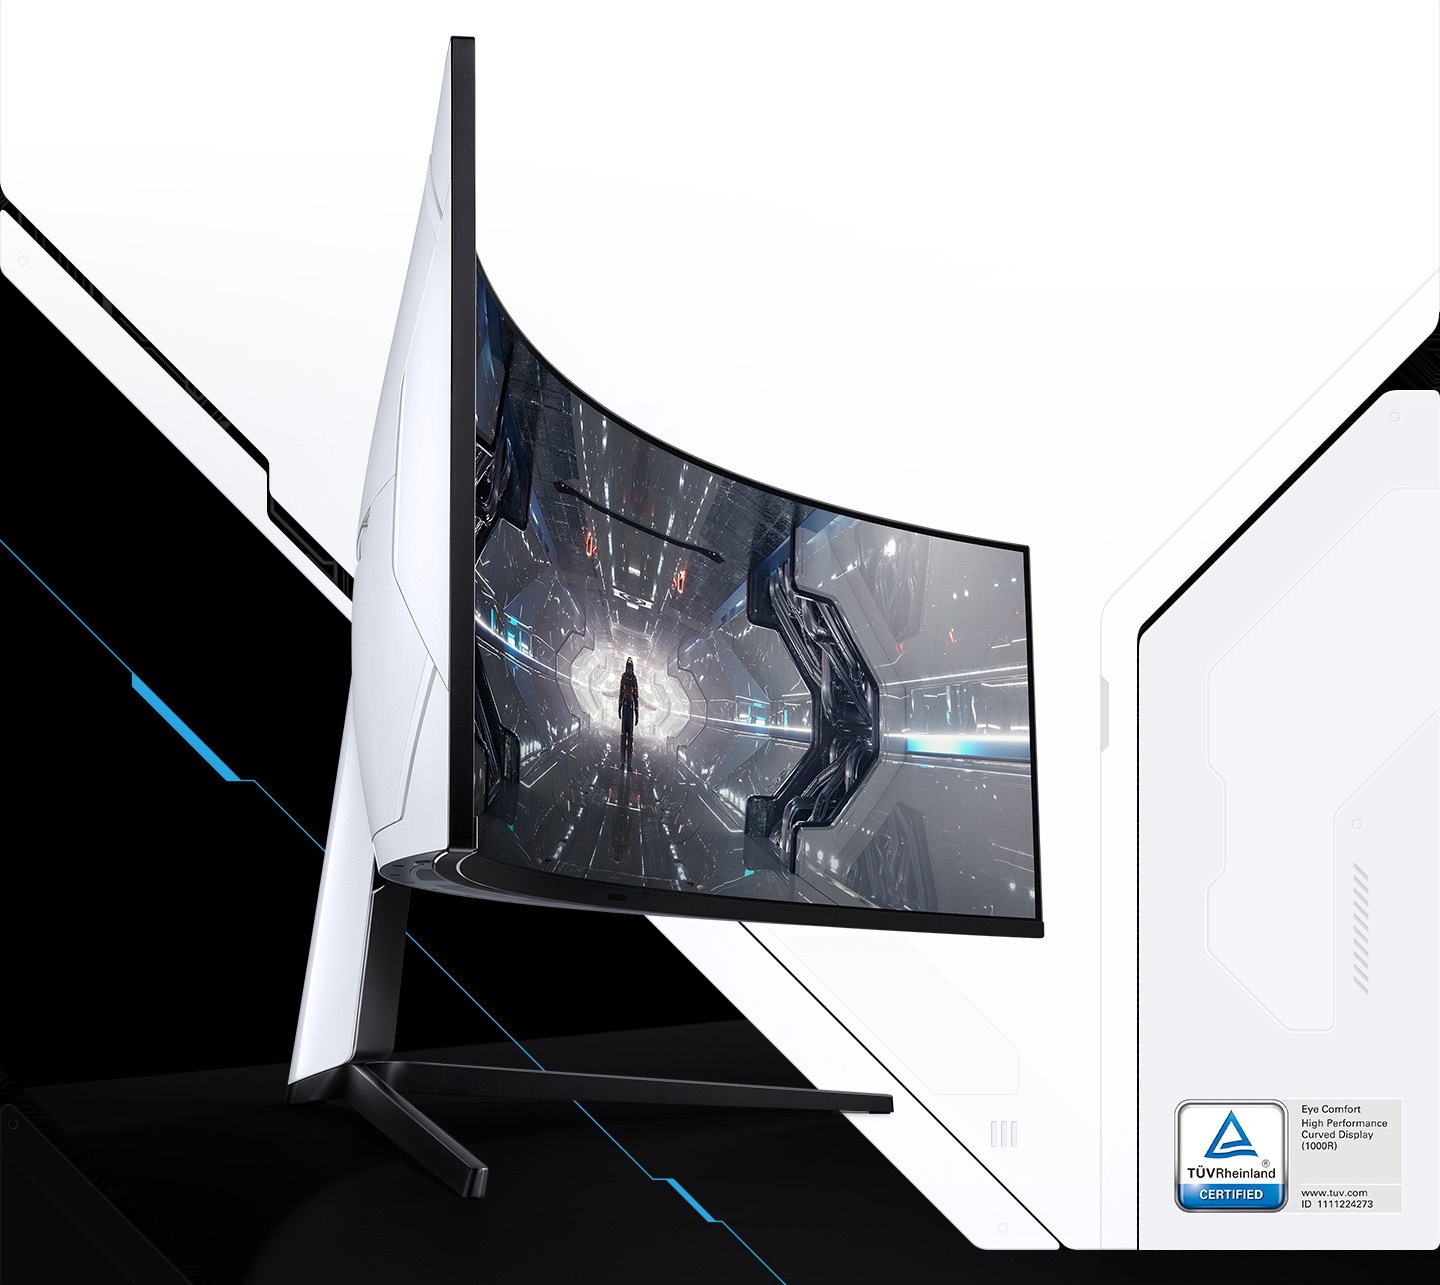 1000R, the new apex of curved screen technology, matches the contours of the human eye for unimaginable realism.